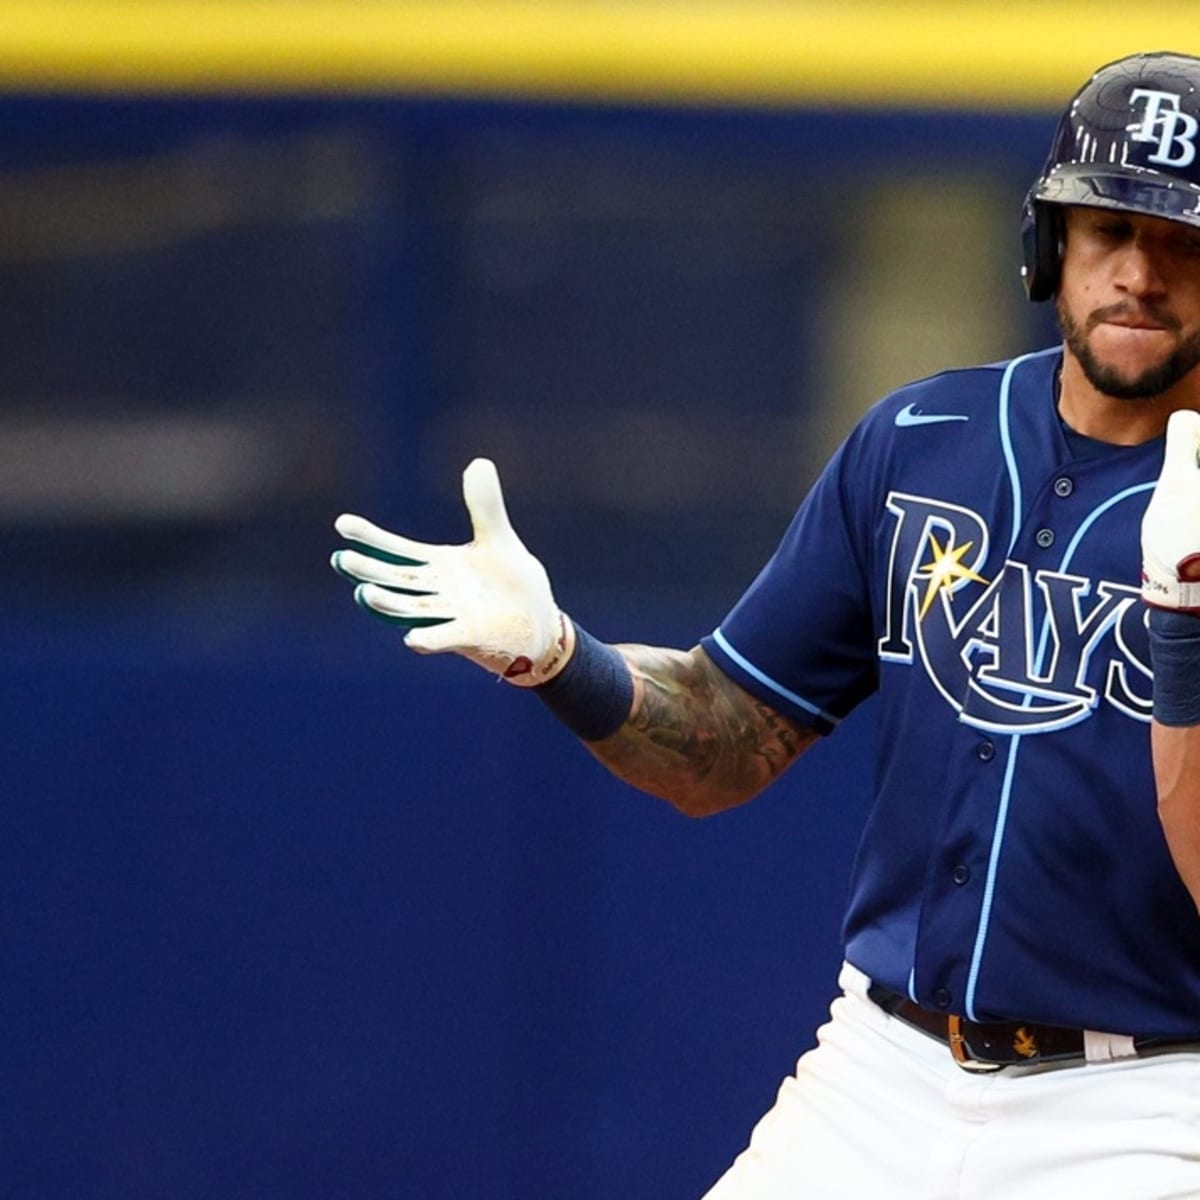 Jose Siri homers and drives in 3 to help Rays roll in Detroit